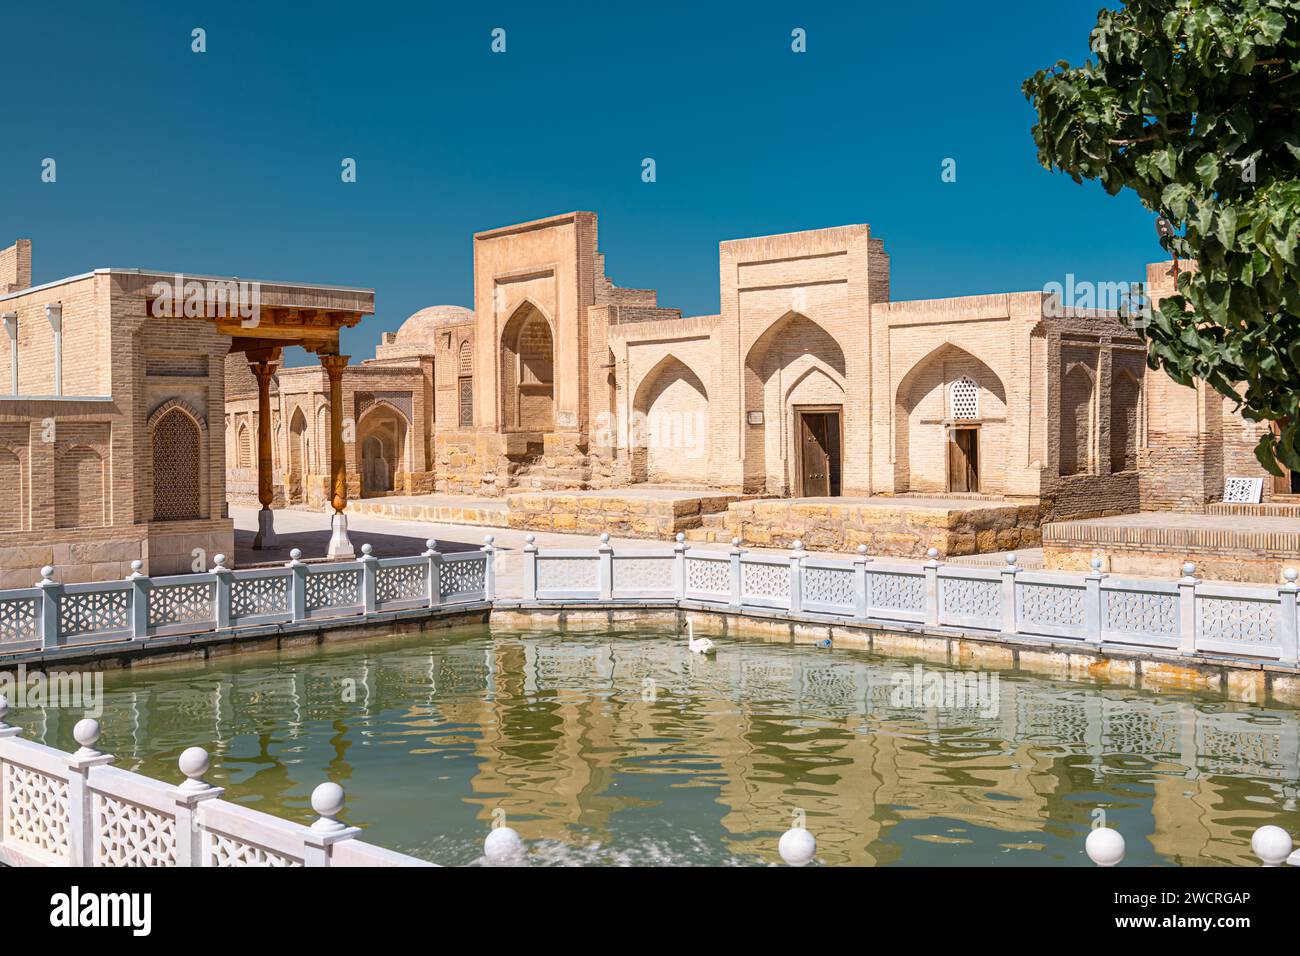 Chor-Bakr situated on the outskirts of Bukhara the burial place of Abu-Bakr-Said said to be a descendant of the prophet Muhammad in Bukhara, Samarkand Stock Photo